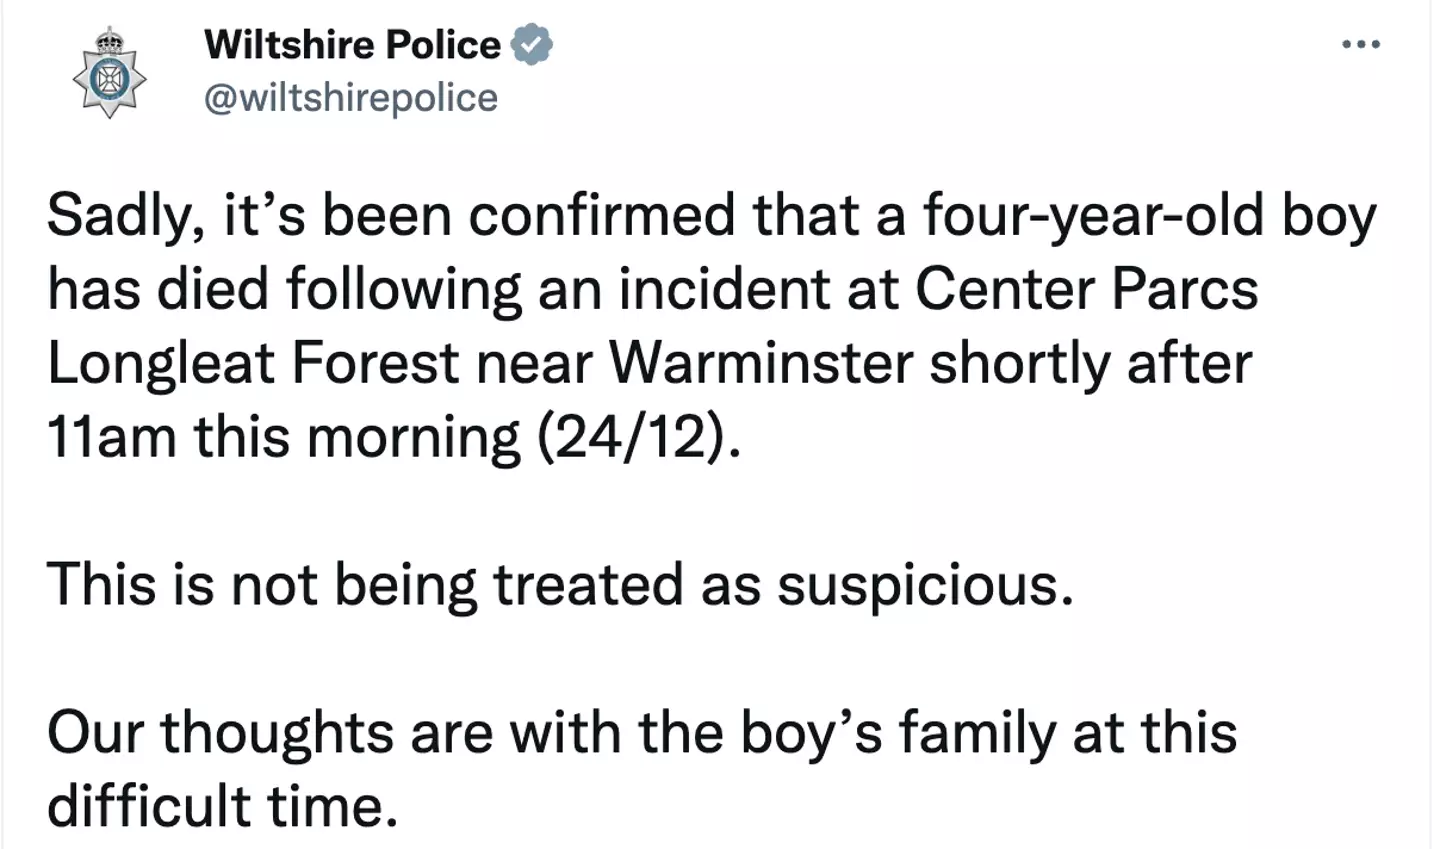 Wiltshire Police confirmed the tragic news.